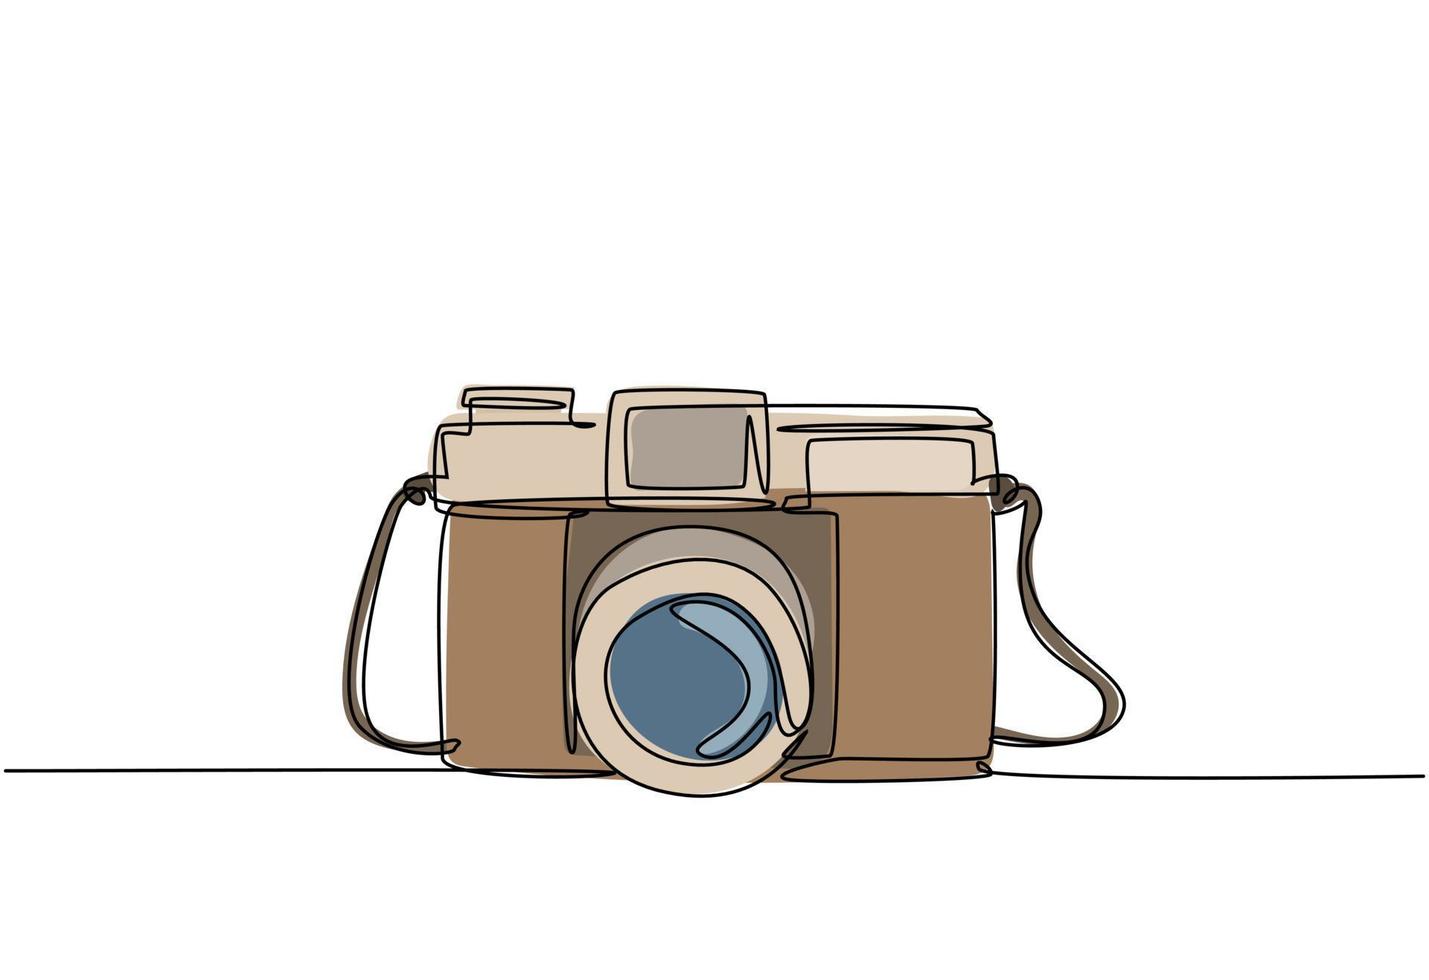 One single line drawing of old retro analog film pocket camera. Vintage classic photography equipment concept continuous line draw design vector illustration graphic